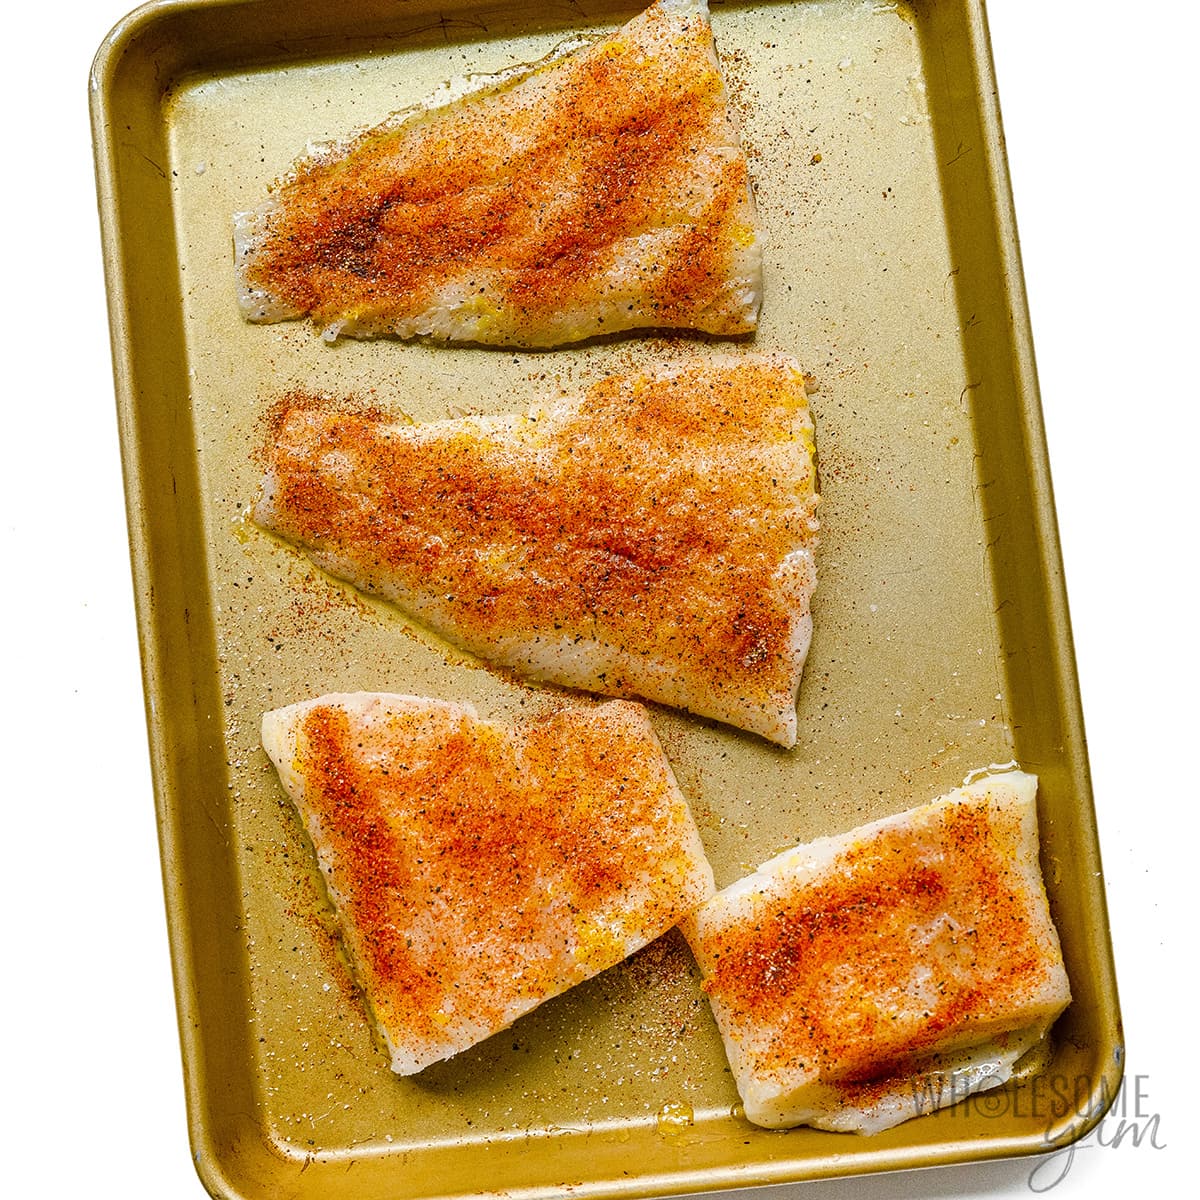 Cod fillets brushed with oil and spices on  a sheet pan.